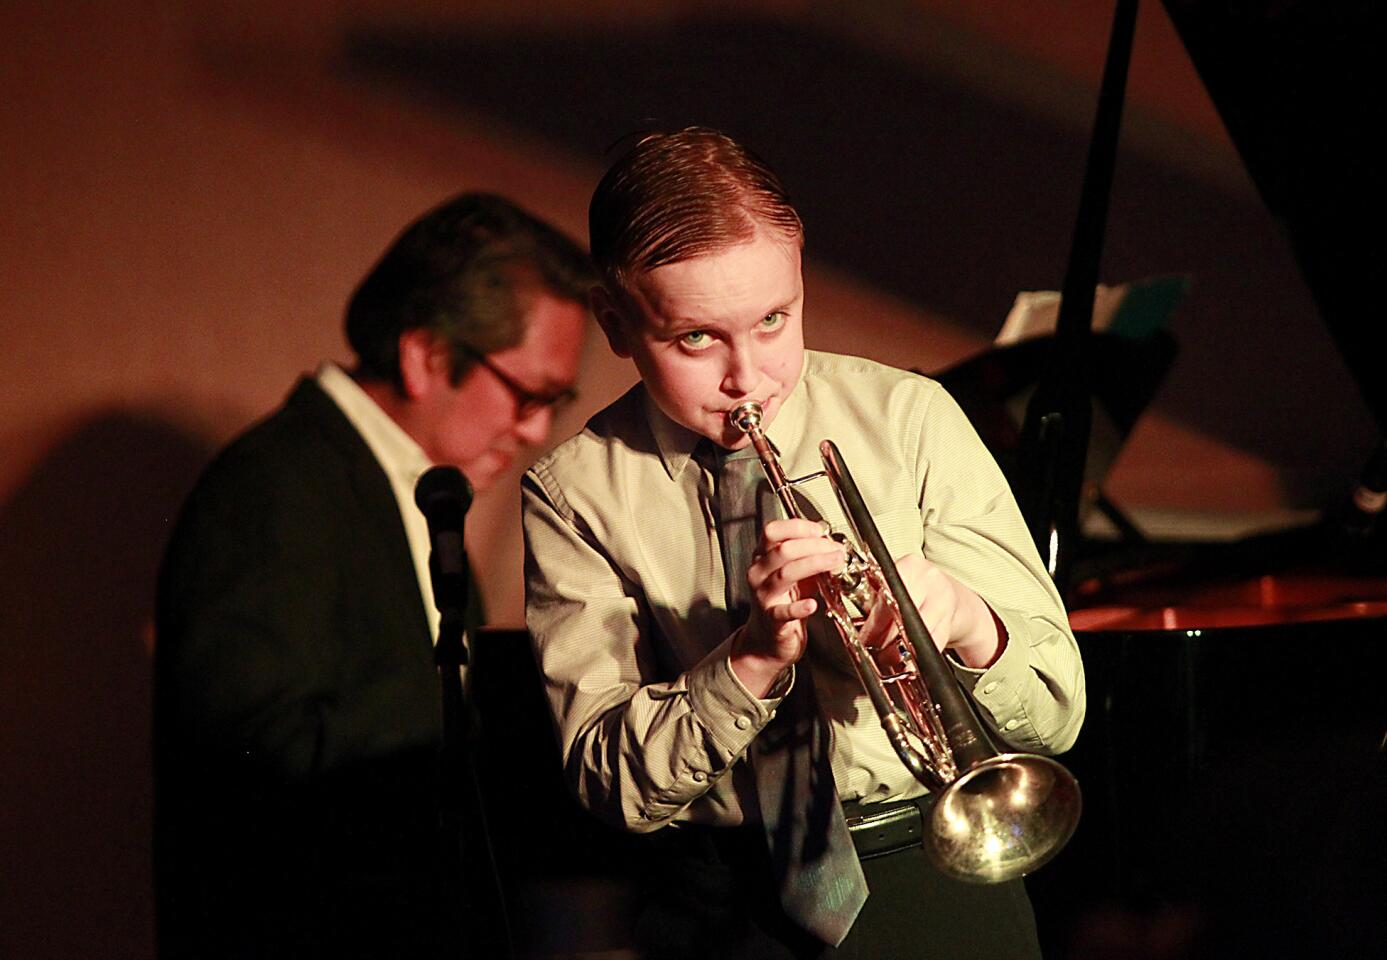 13-year-old trumpet sensation Geoff Gallante performs "Cheek to Cheek" during the opening night "Dine with Duos and Trios" at the 14th annual Newport Beach Jazz Party in Sam and Harry's at the Newport Beach Marriott on Thursday.